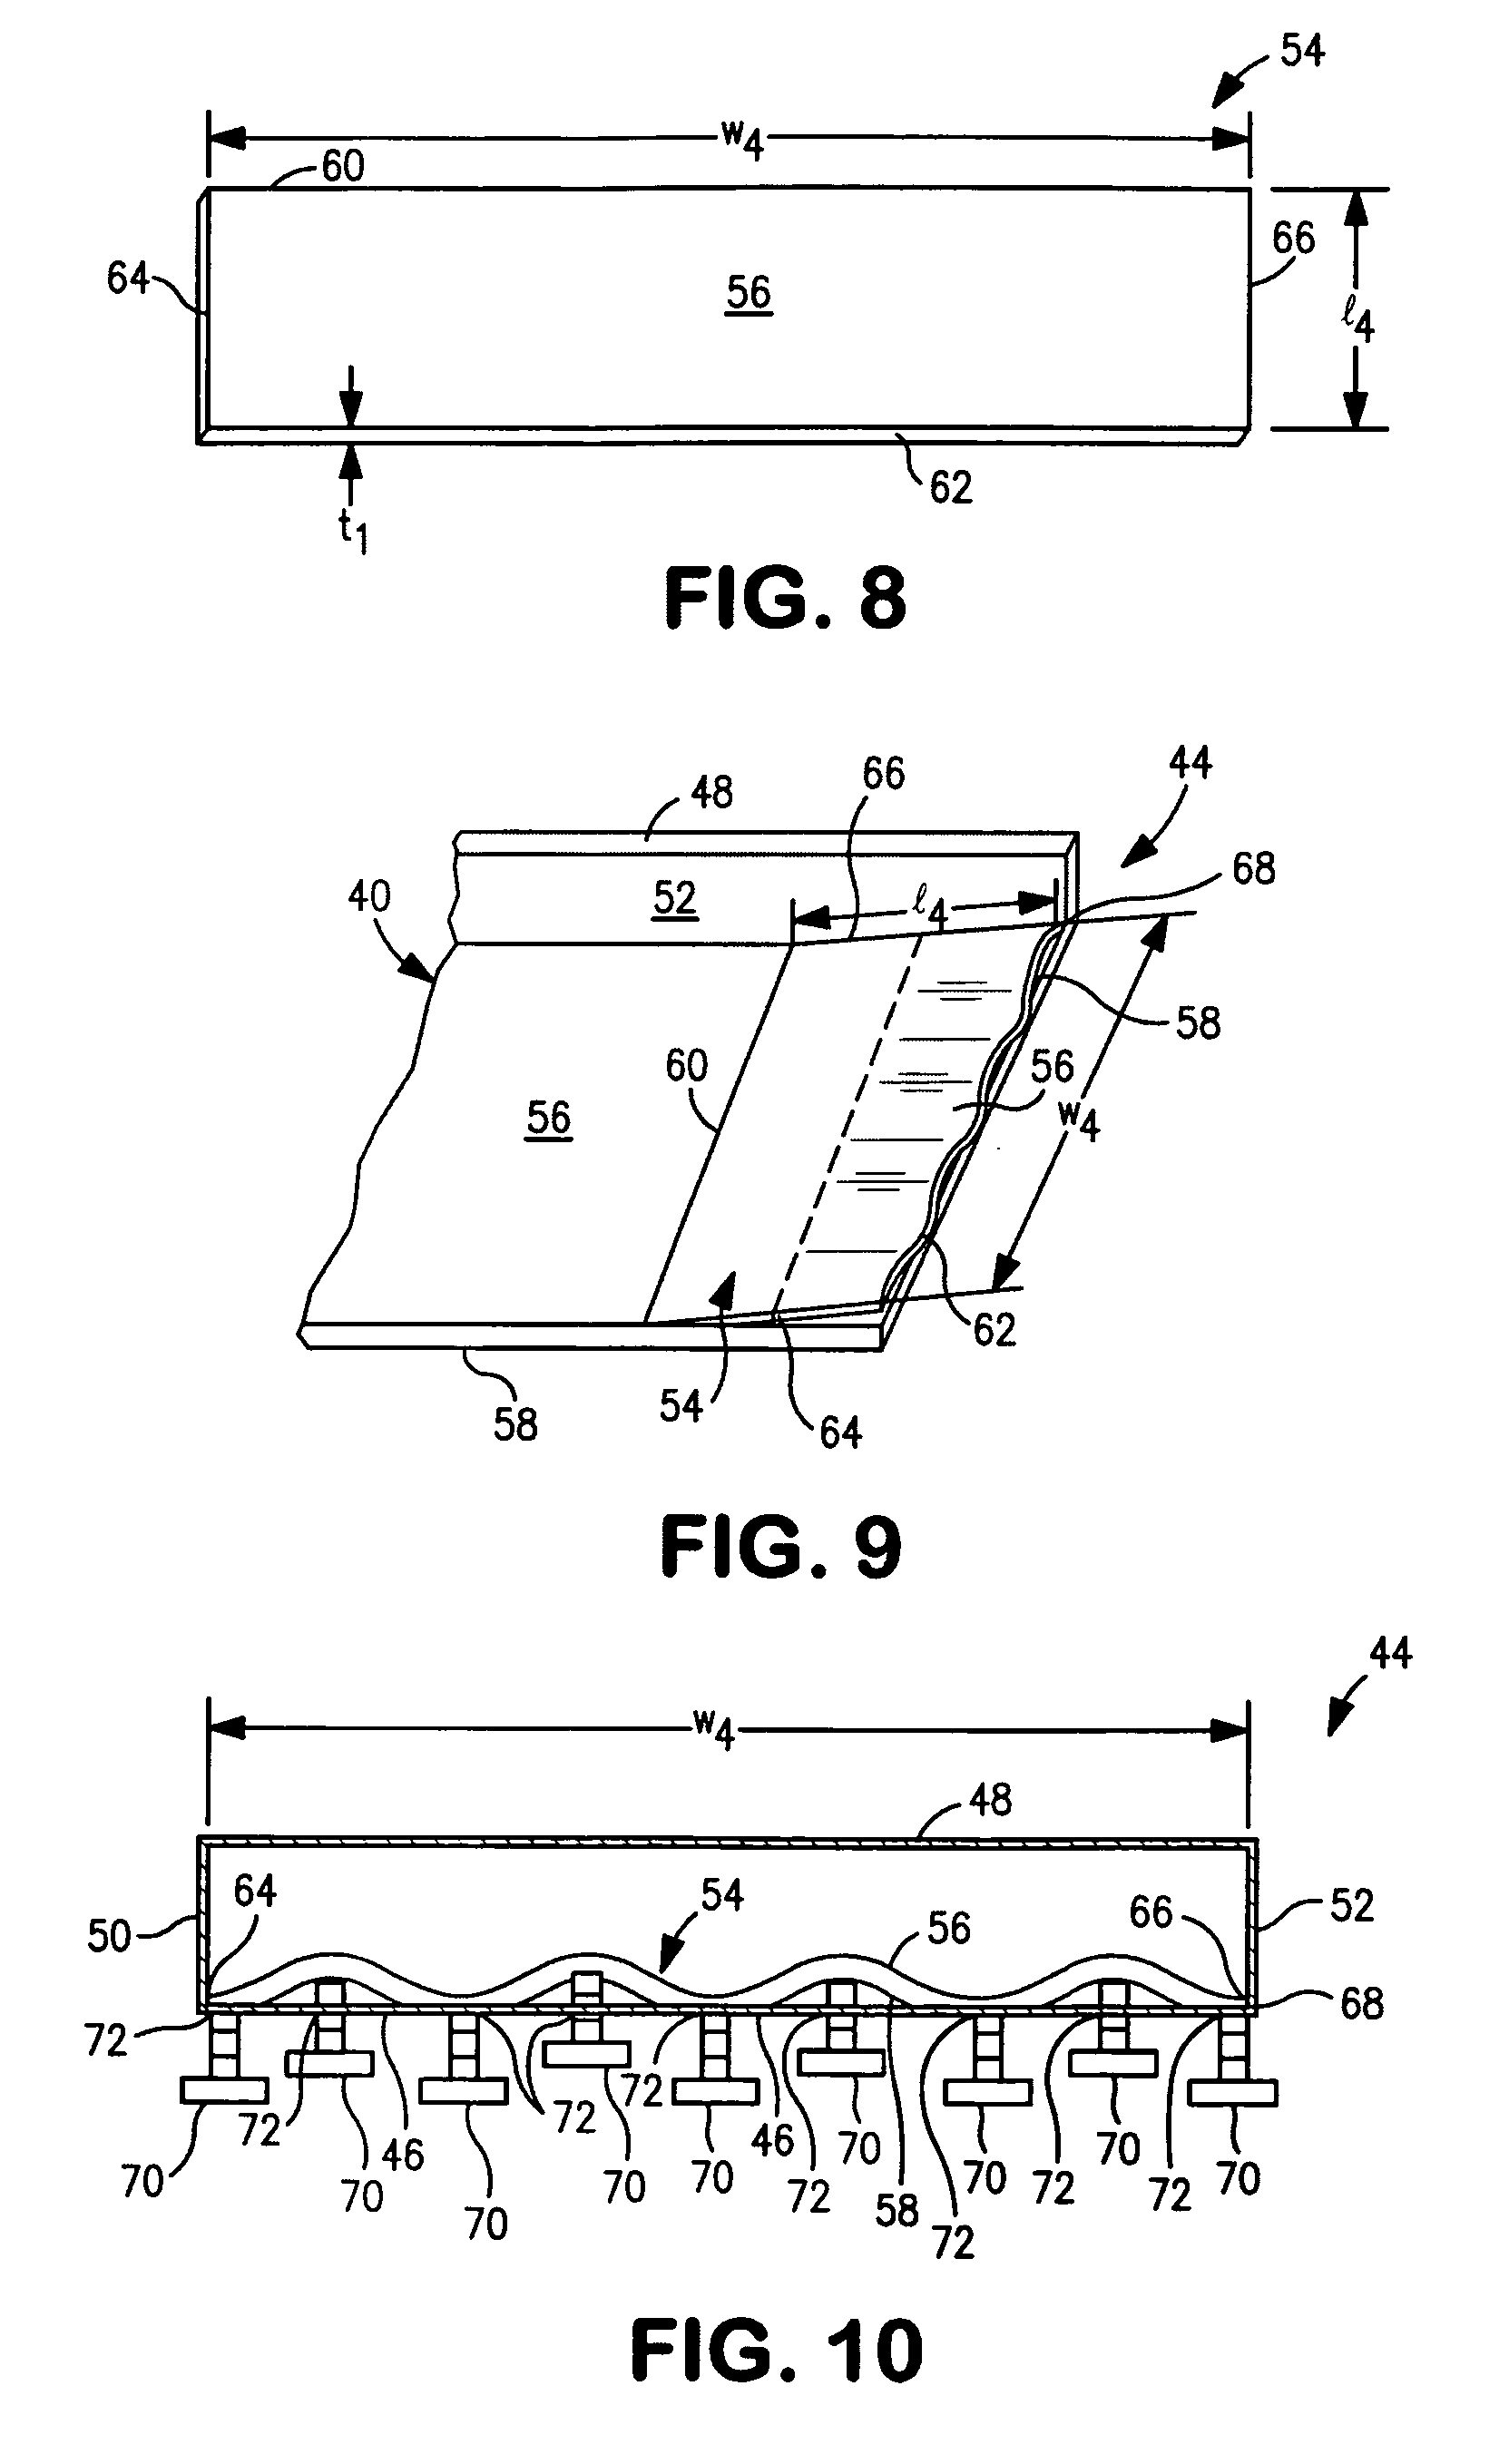 Apparatus and method for dry forming a uniform non-woven fibrous web